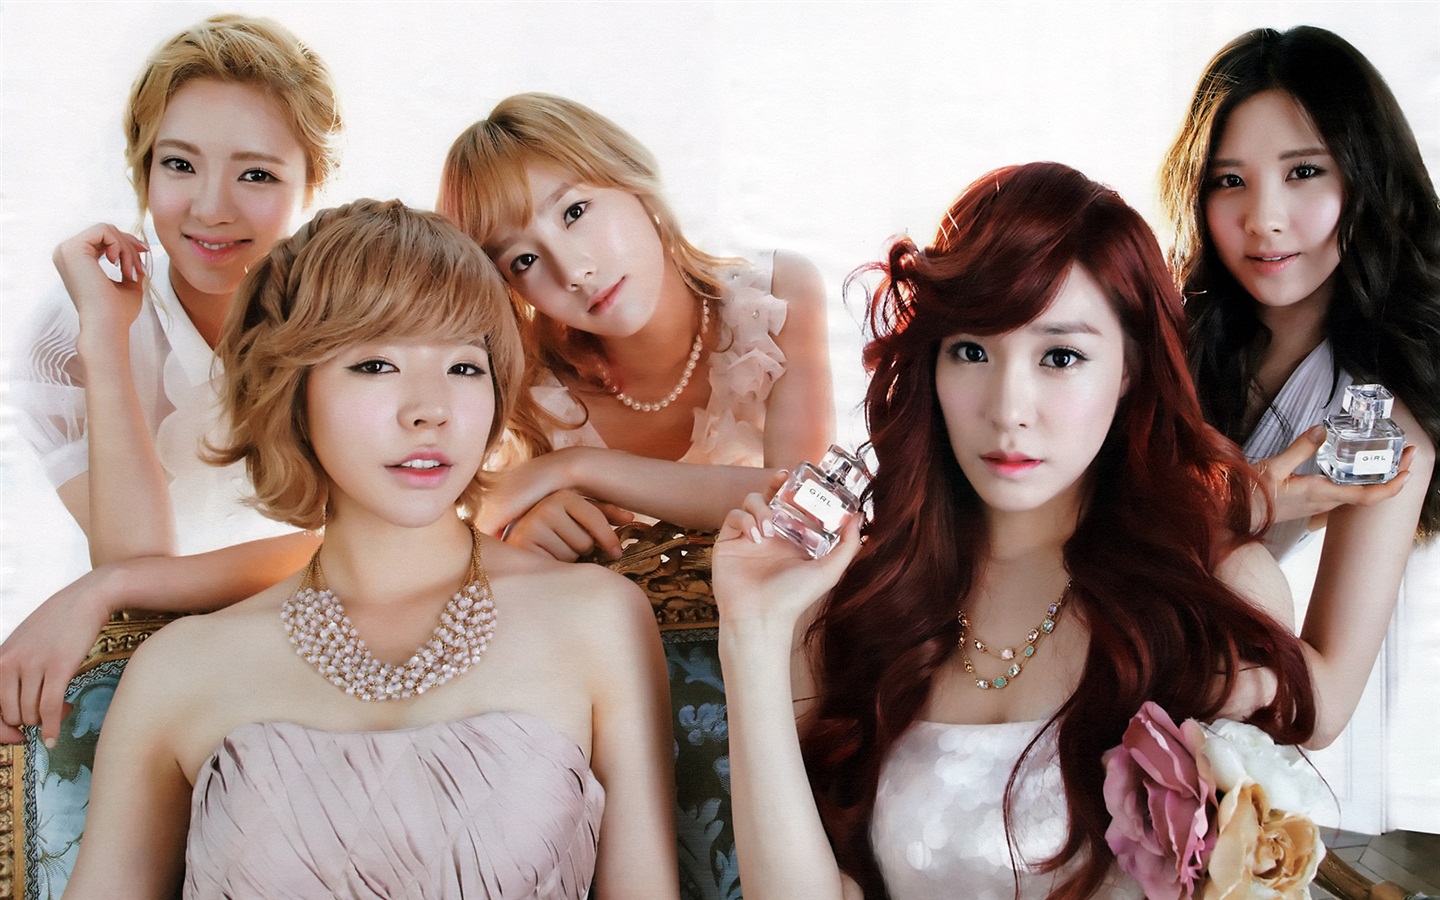 Girls Generation latest HD wallpapers collection #4 - 1440x900